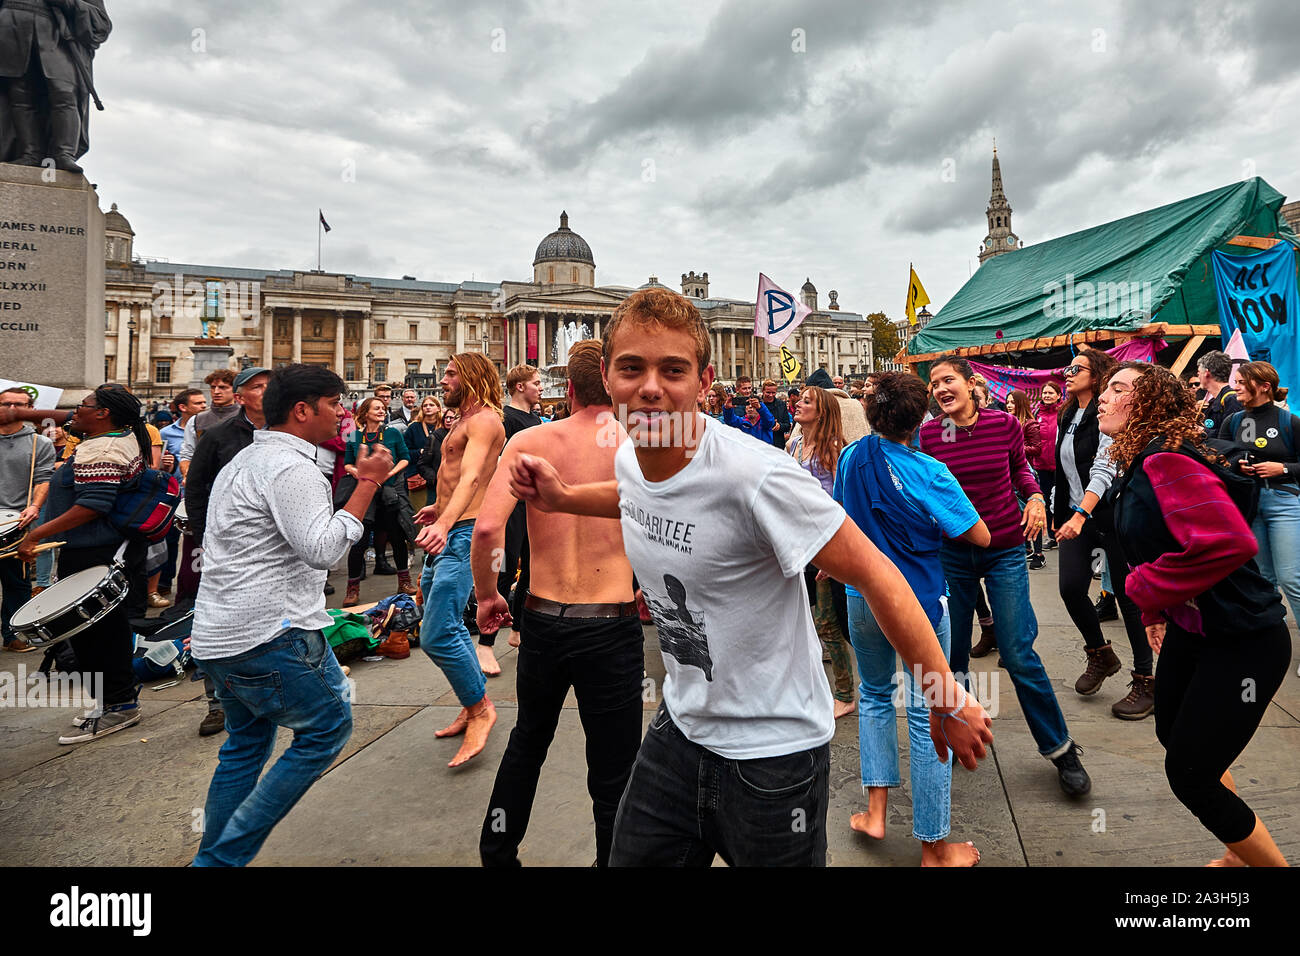 London, U.K. - Oct 8, 2019: Dancers in an impromptu display on the second day of an occupation of Trafalgar Square by campaigners from Extinction Rebellion. Stock Photo